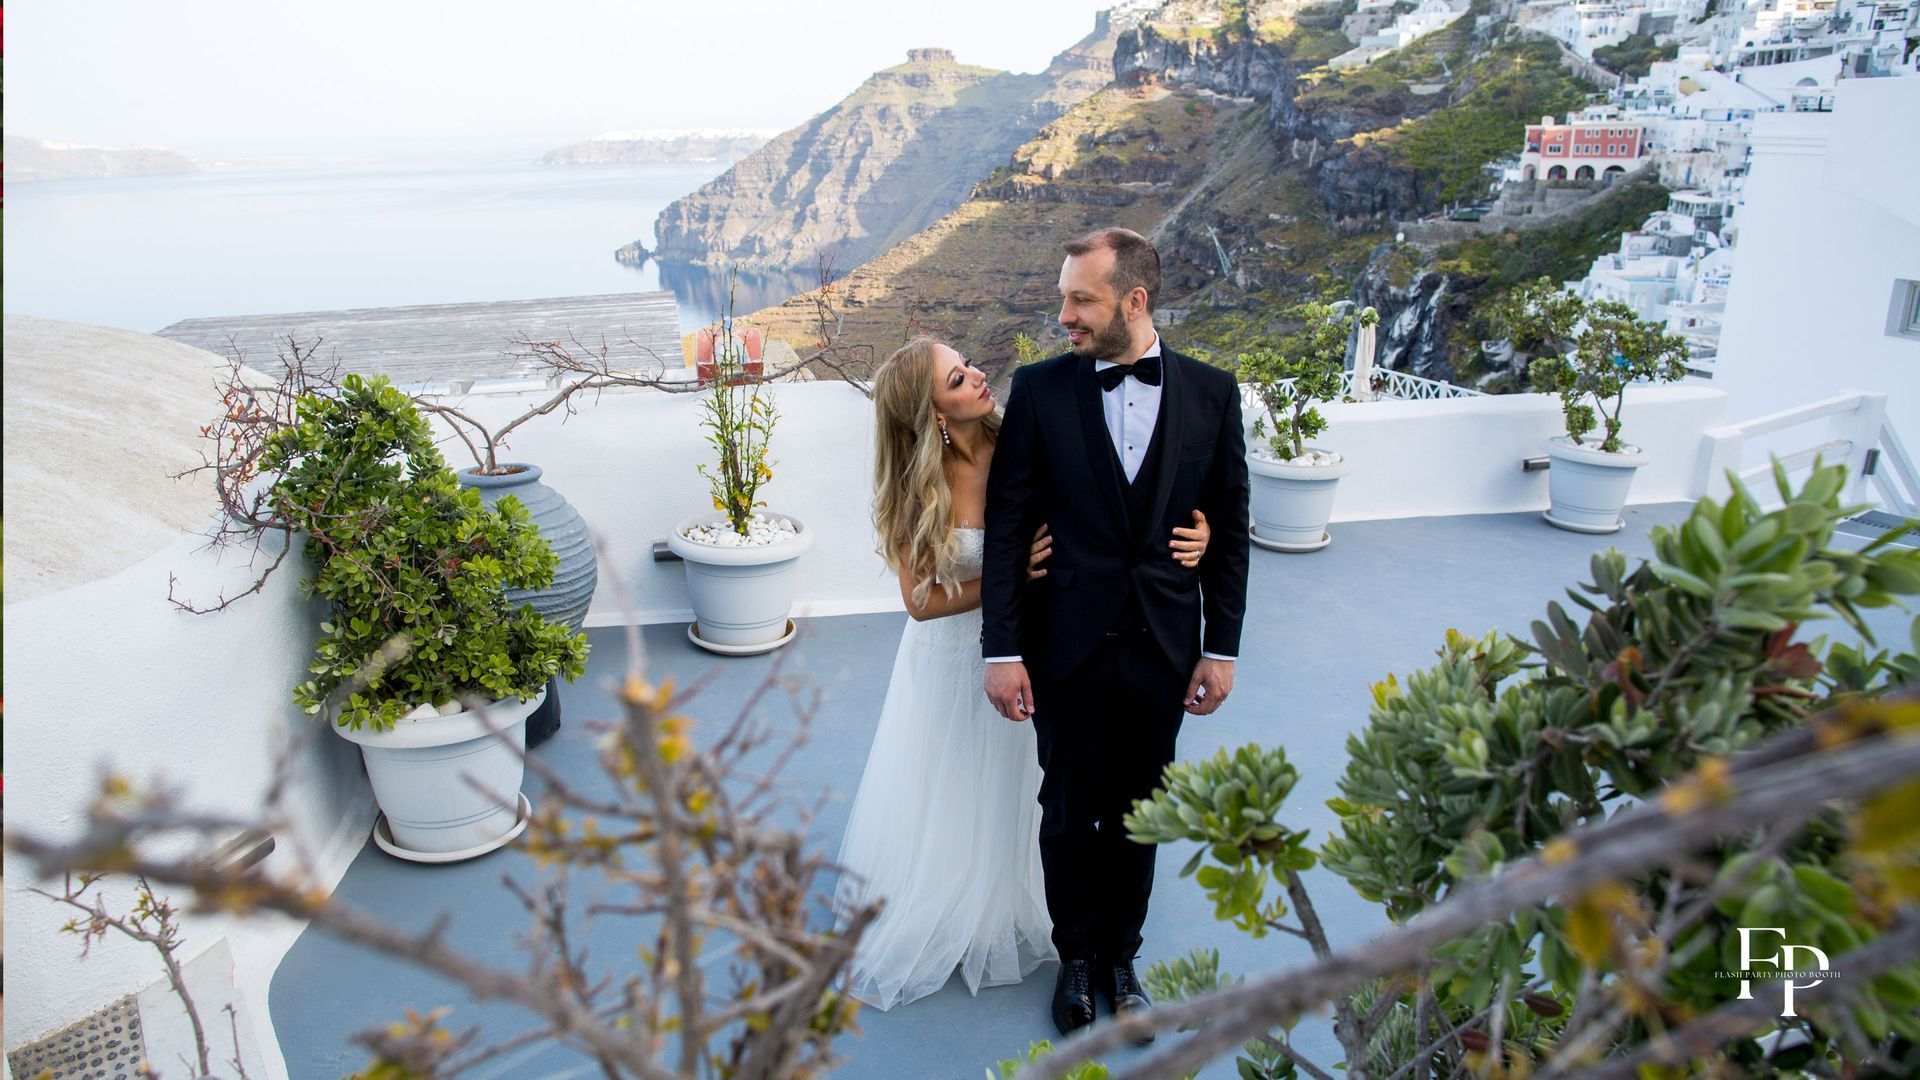 Groom and bride share a tender moment in their San Jose destination wedding photo.